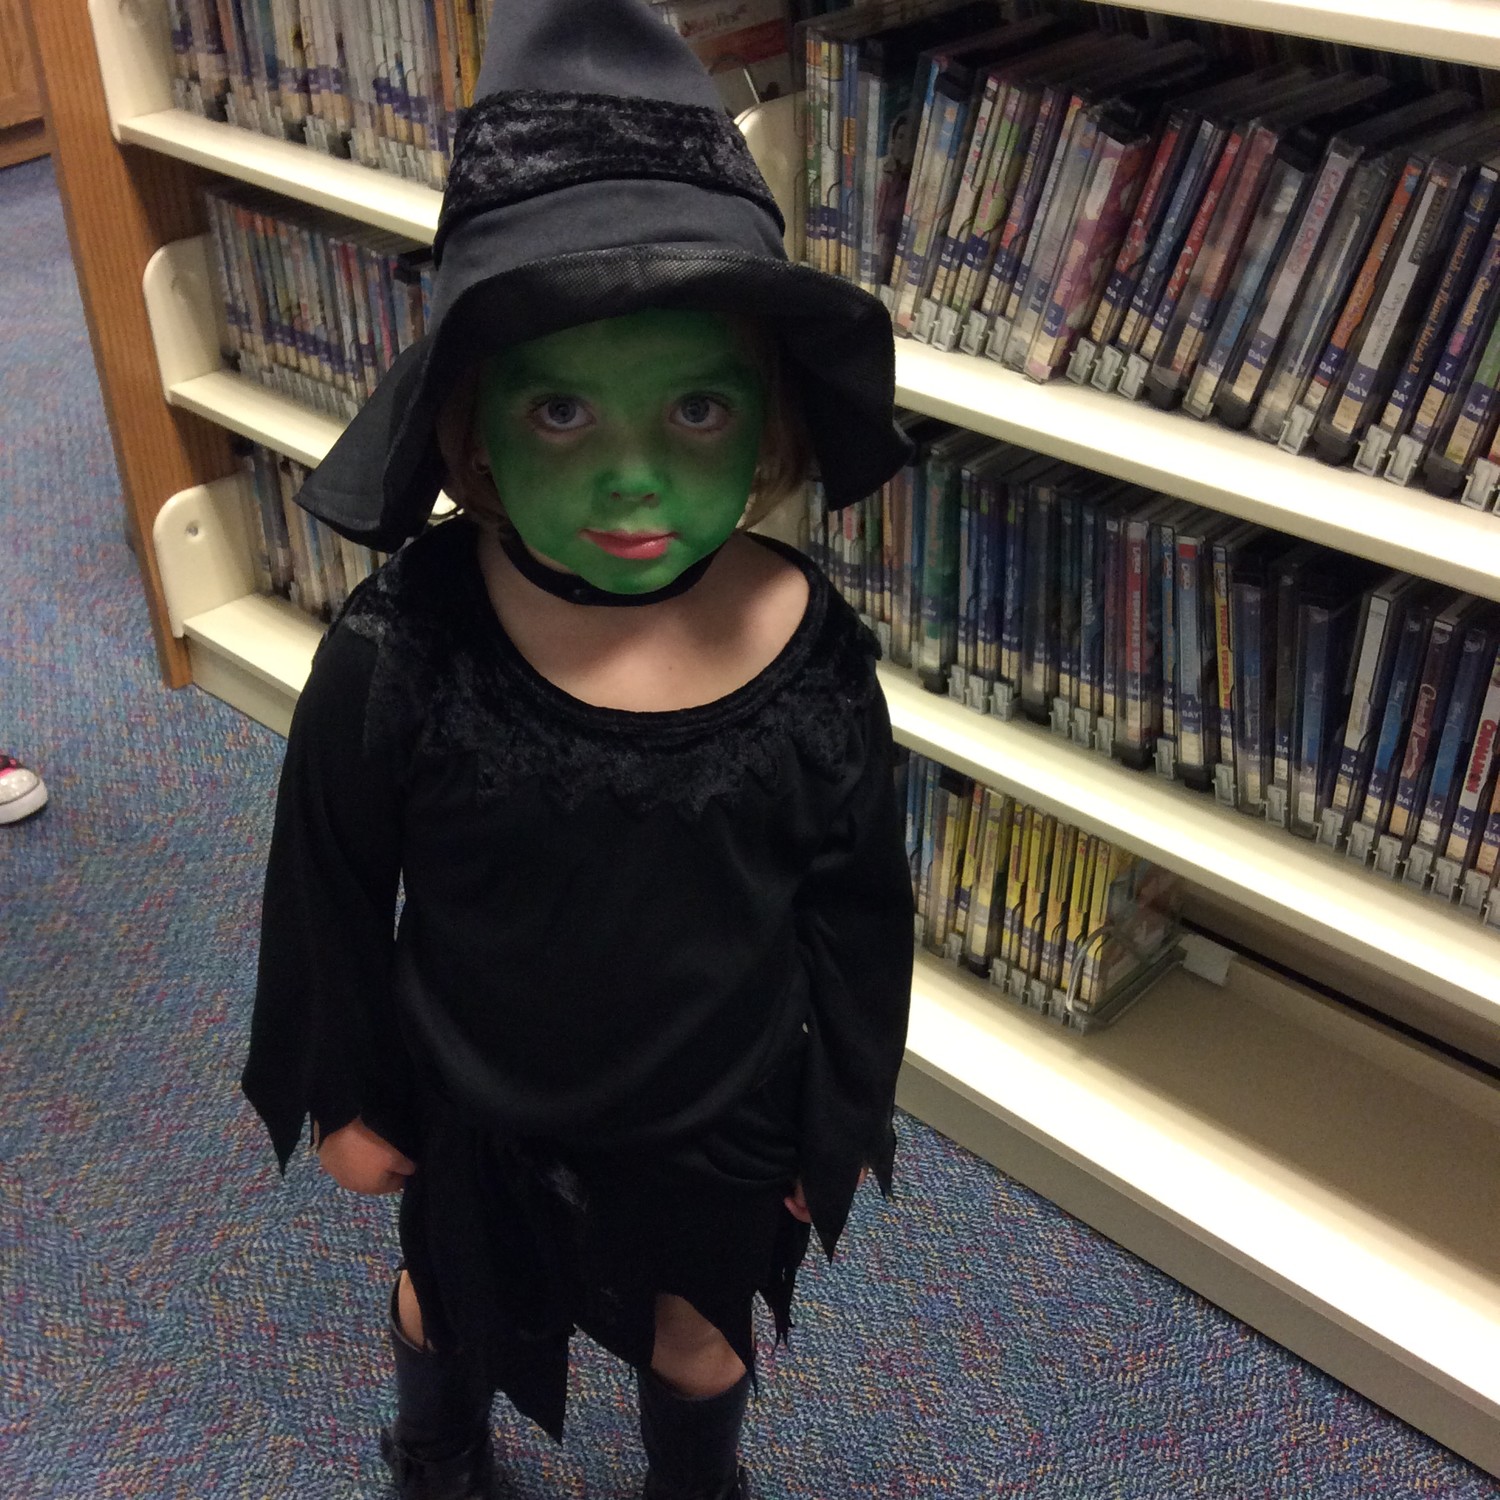 This little witch,Ava Nagy, is too adorable to scare anyone!